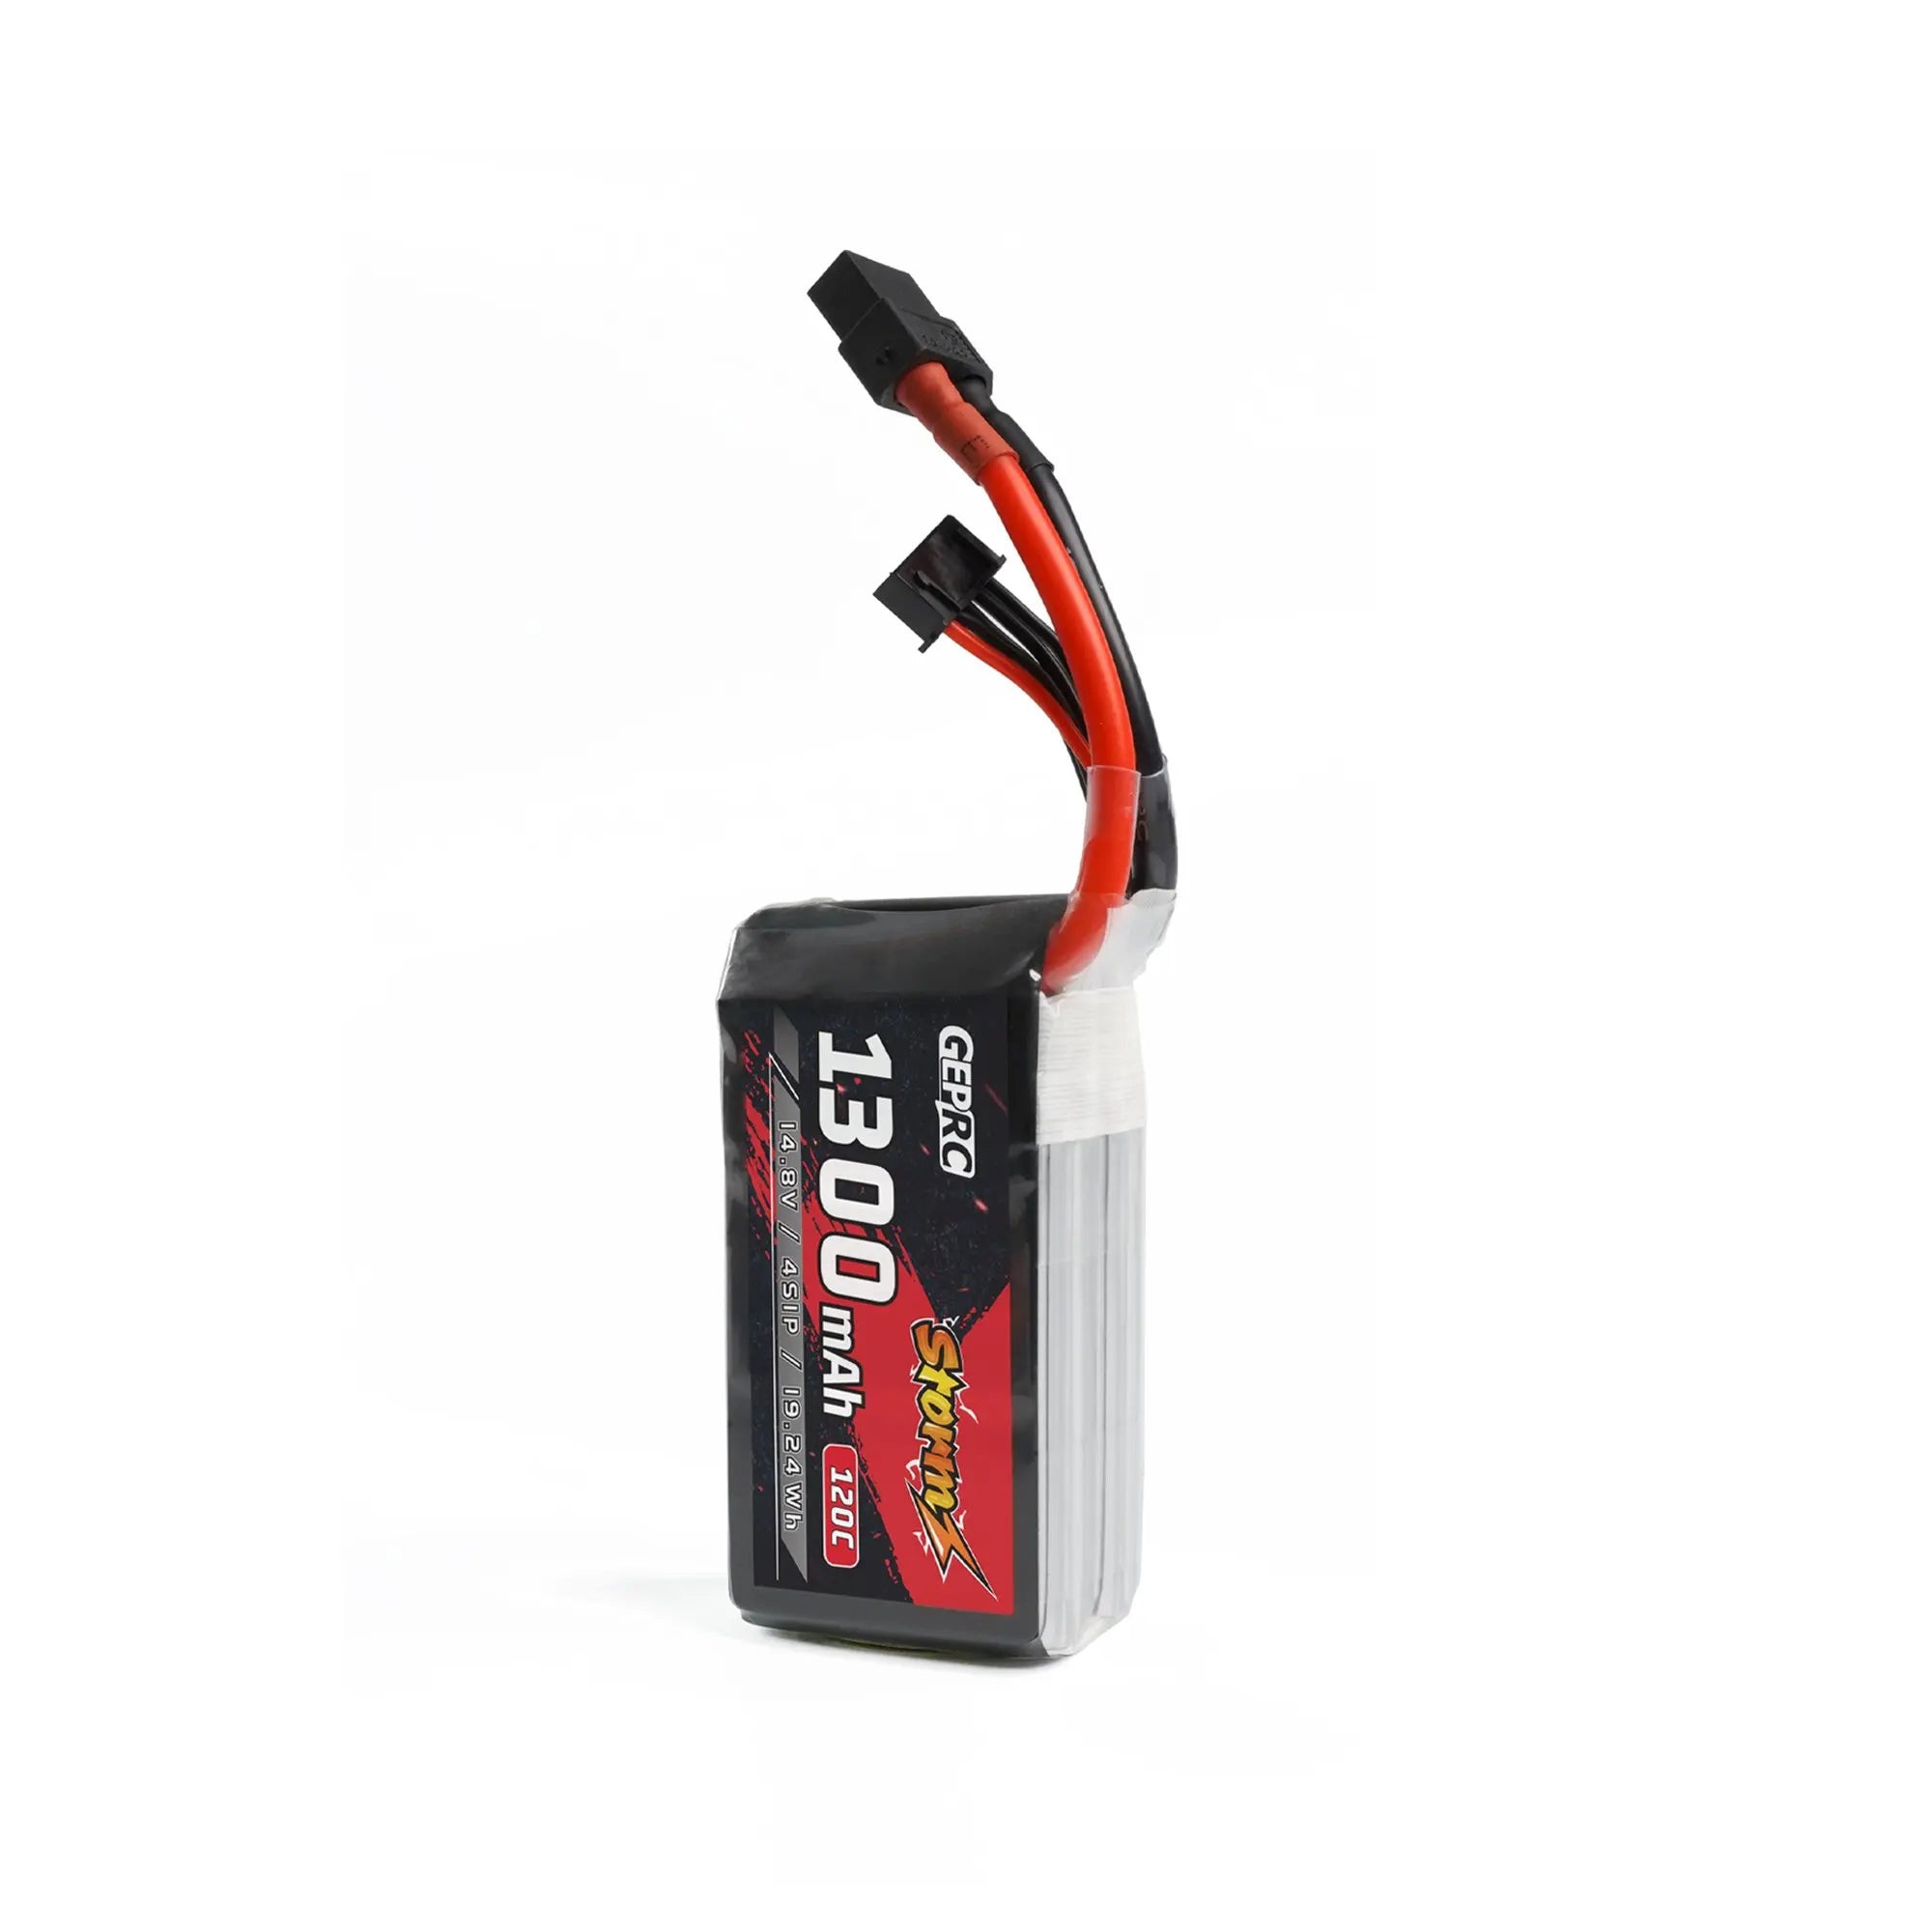 GEPRC Storm 4S 1300mAh 120C Lipo Battery, it is easy to cause short circuit and burning . it is forbidden to disassemble and 